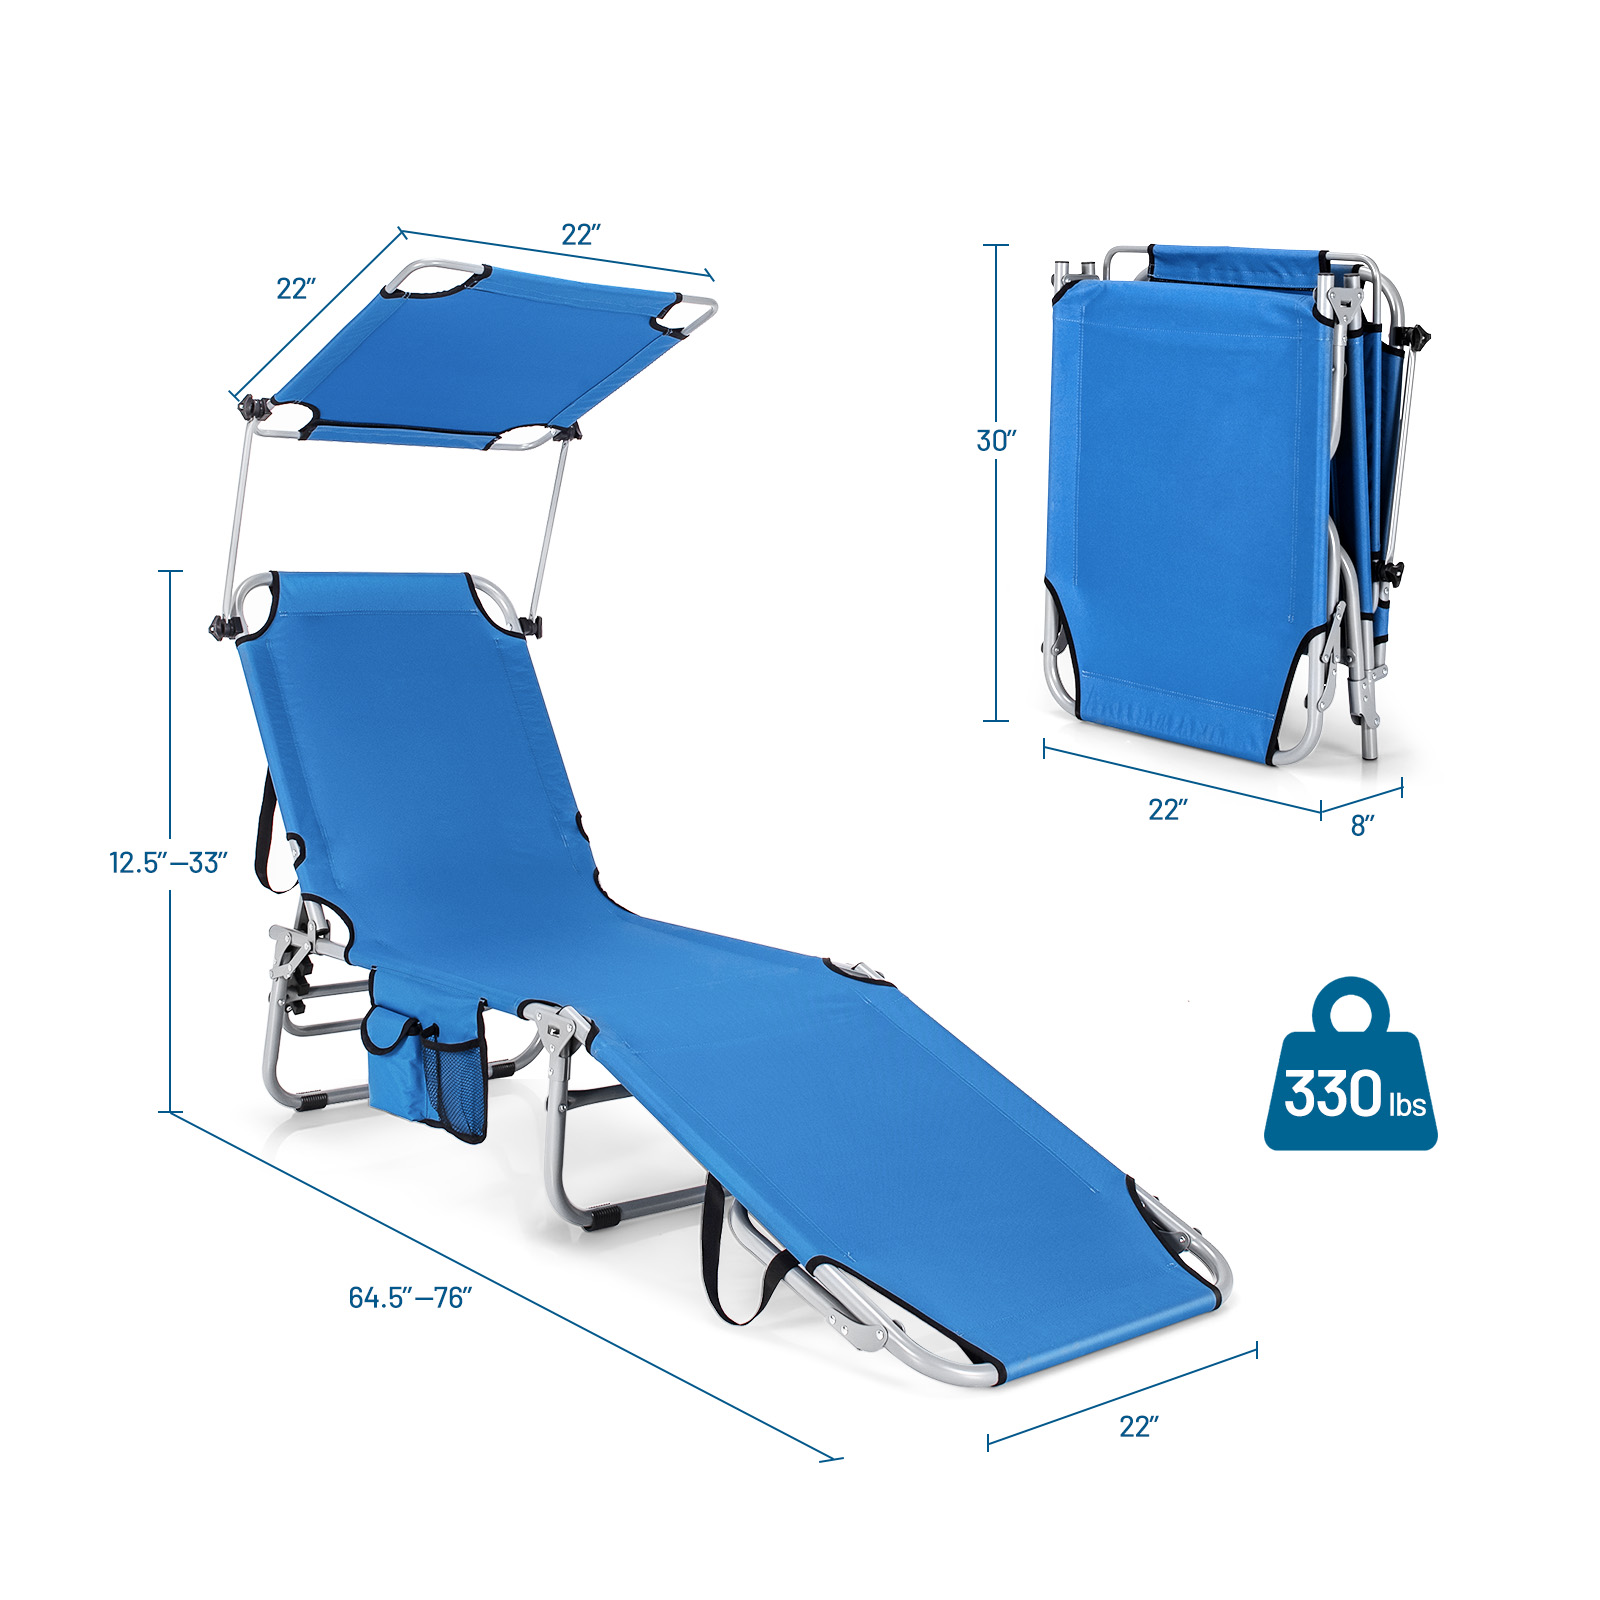 Topbuy Foldable Sun Shading Chaise Lounge Chair Adjustable Beach Recliner Blue - image 4 of 10